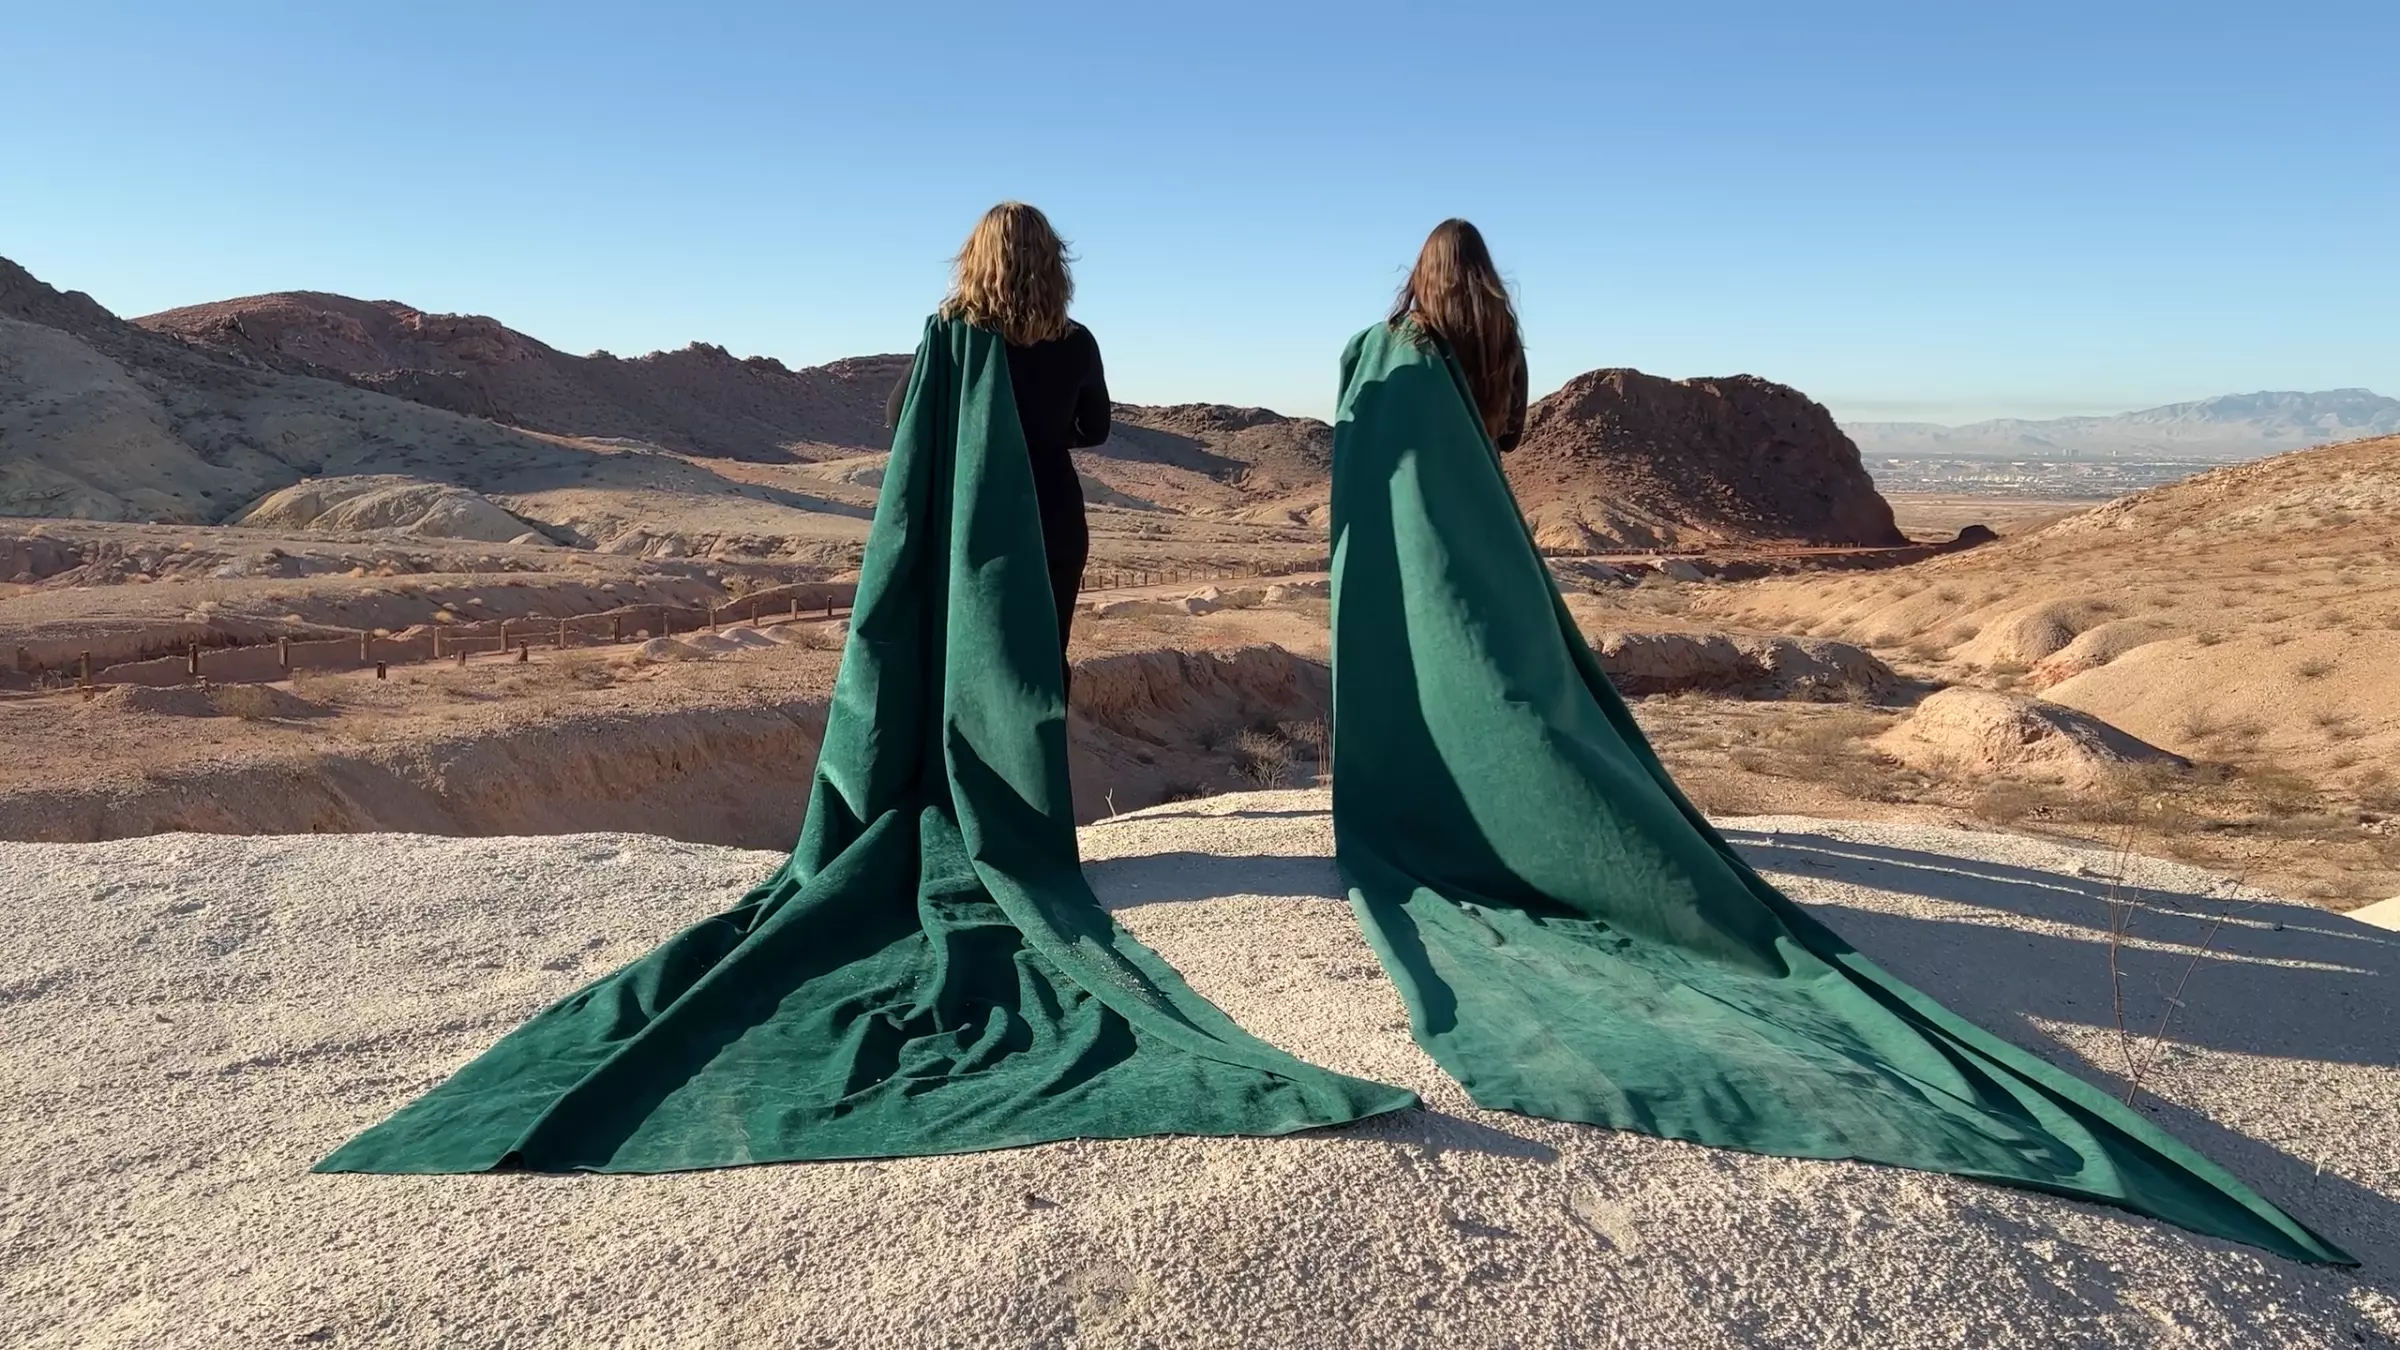 photograph of two people draped in long green capes facing a mountainous desert landscape